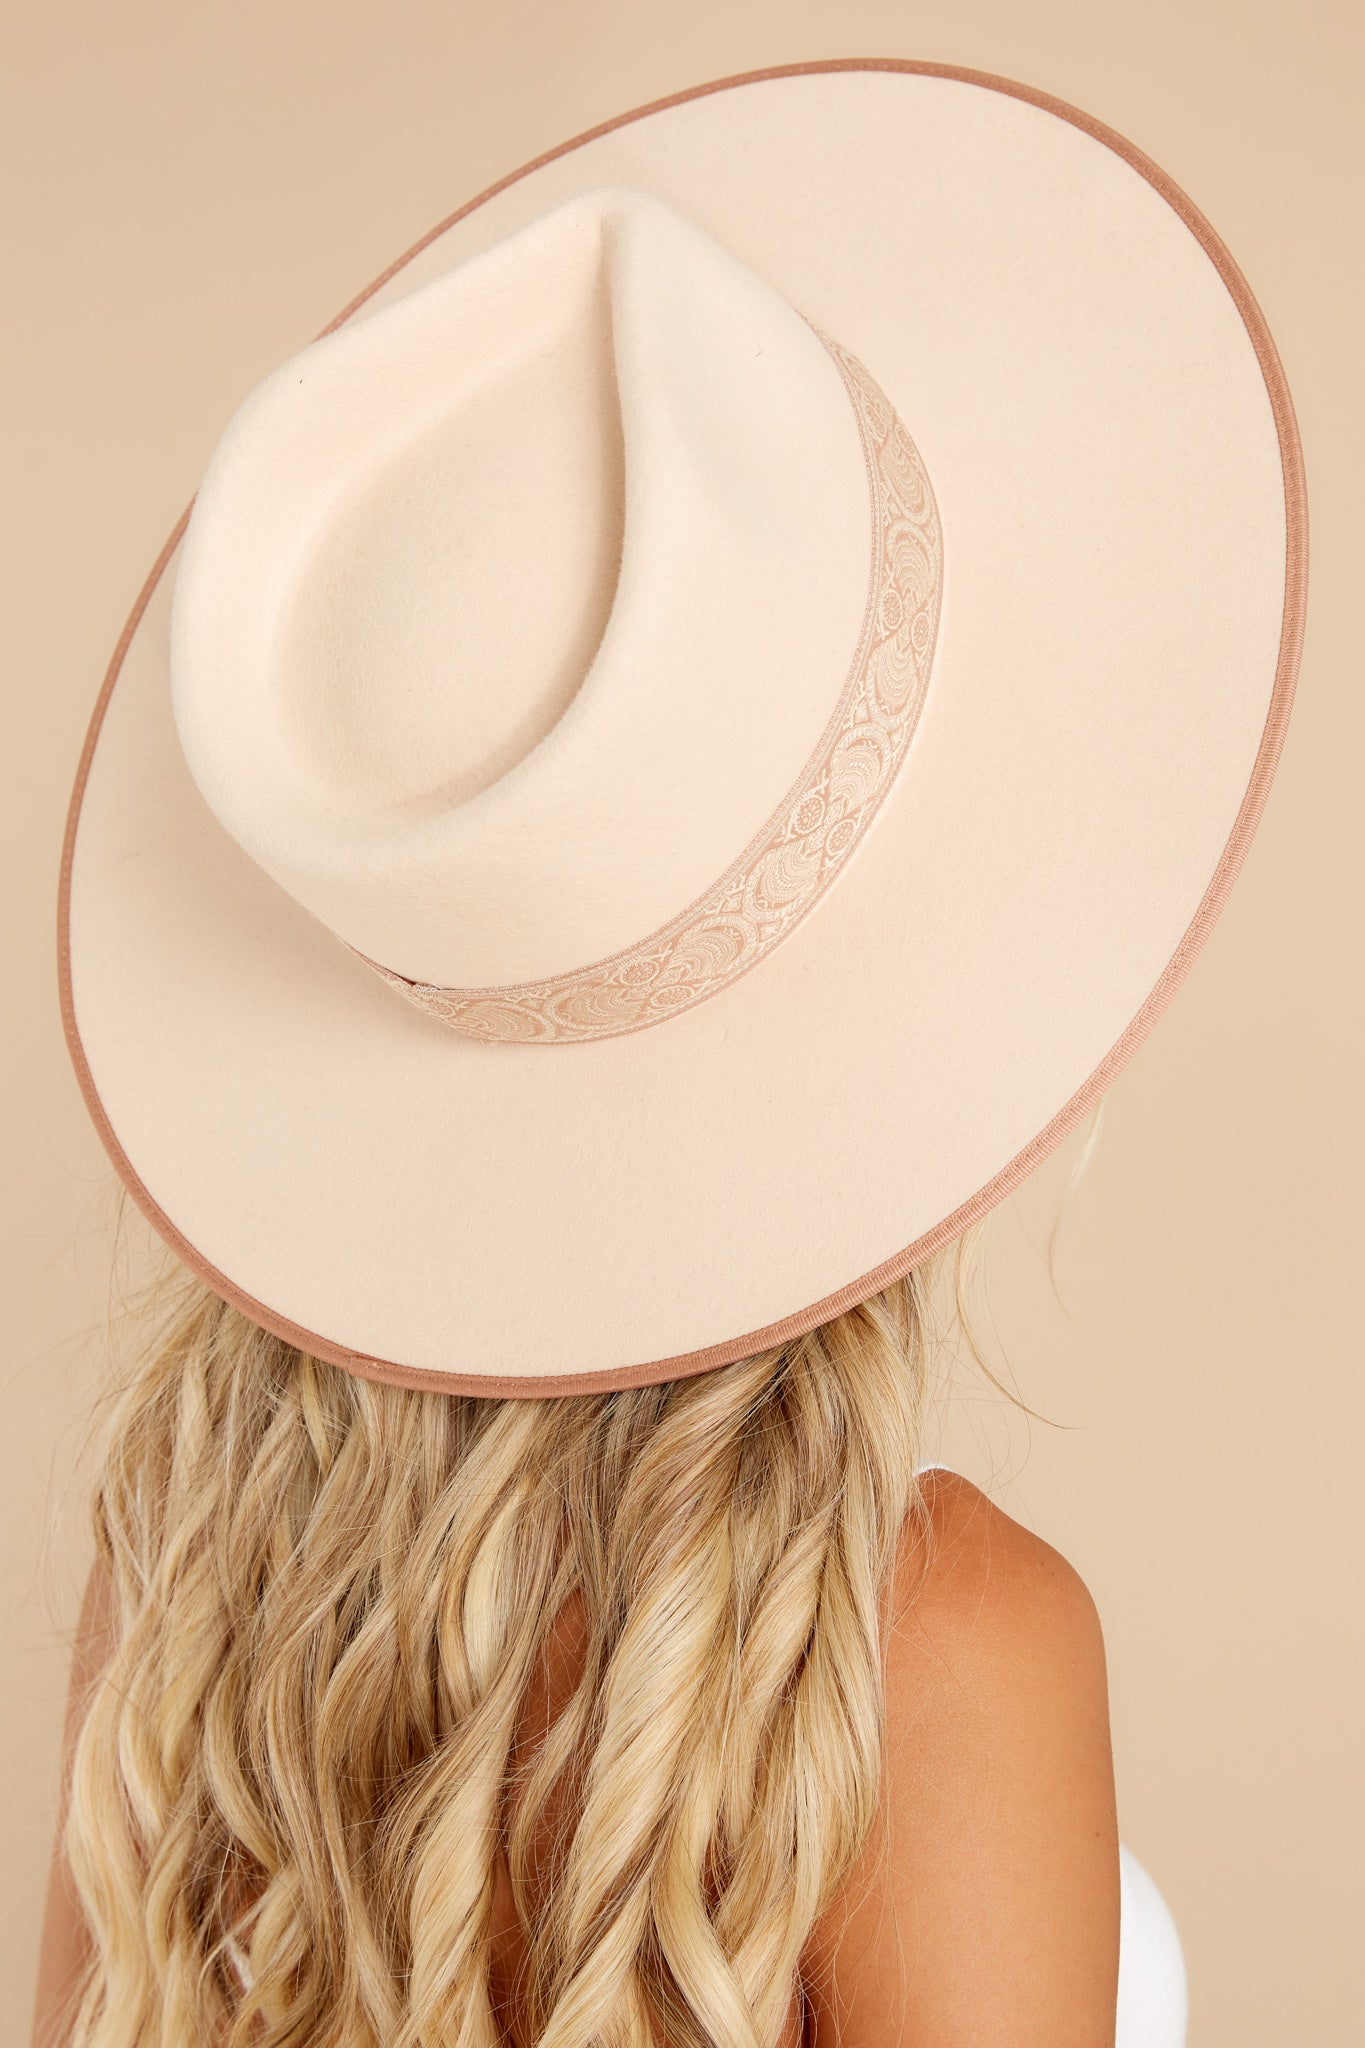 Angled back view of this hat that is featuring a stiffened wool fedora with a rigid crown design, and trimmed with a tonal grosgrain ribbon.